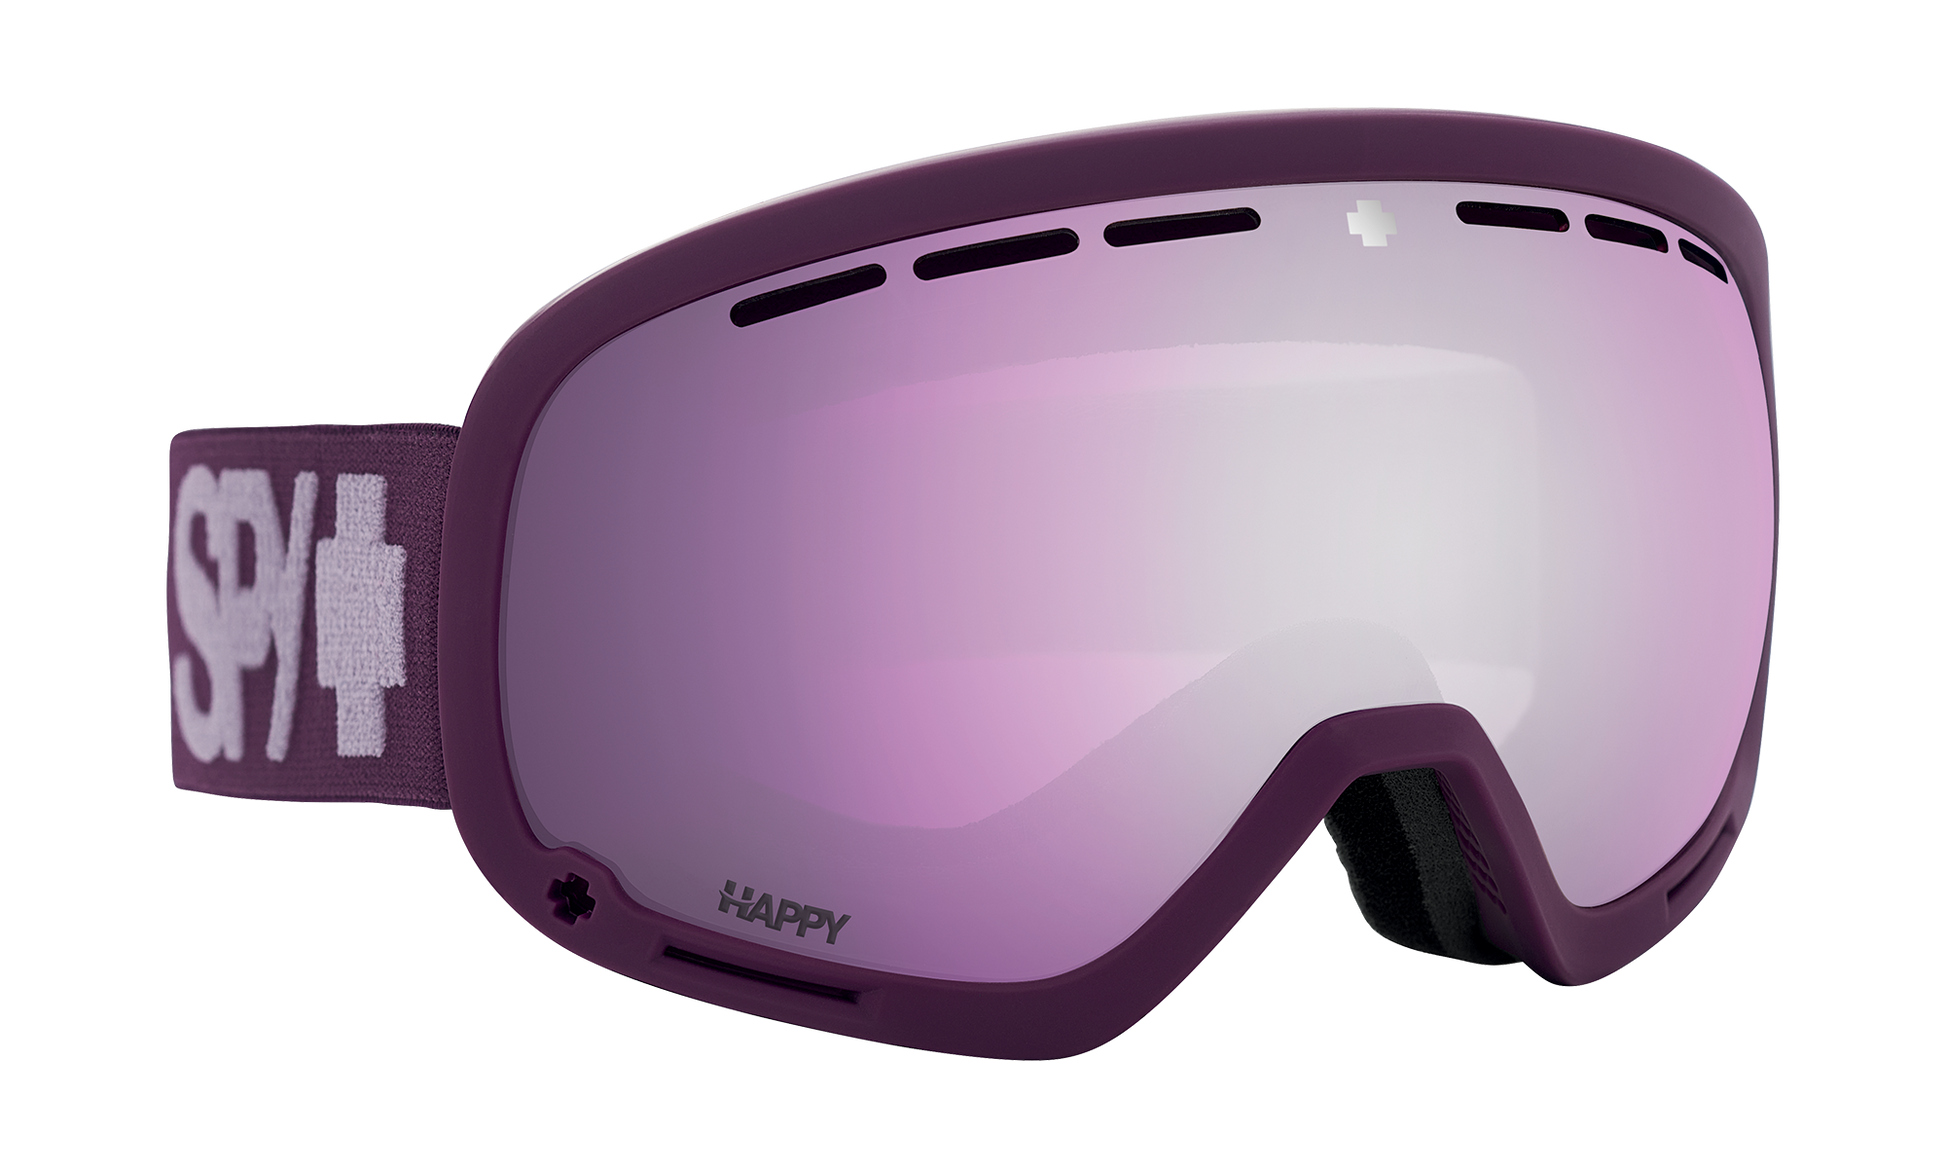 SPY Marshall Snow Goggle Goggles  Happy ML Rose with Violet Spectra Mirror Monochrome Purple One Size